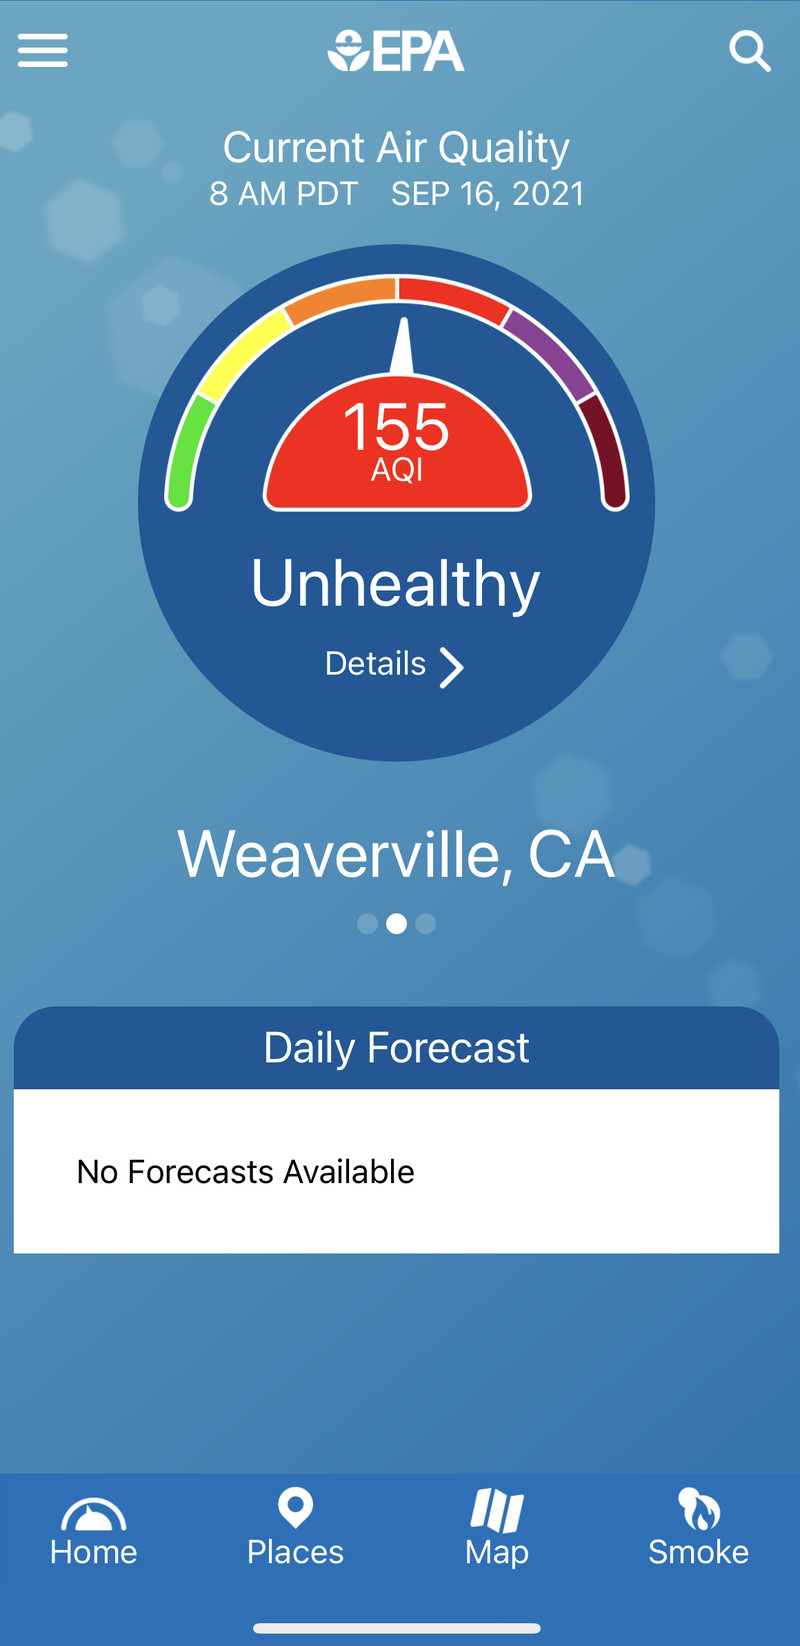 A screenshot of the air quality index meter reading 155, indicating unhealthy air.